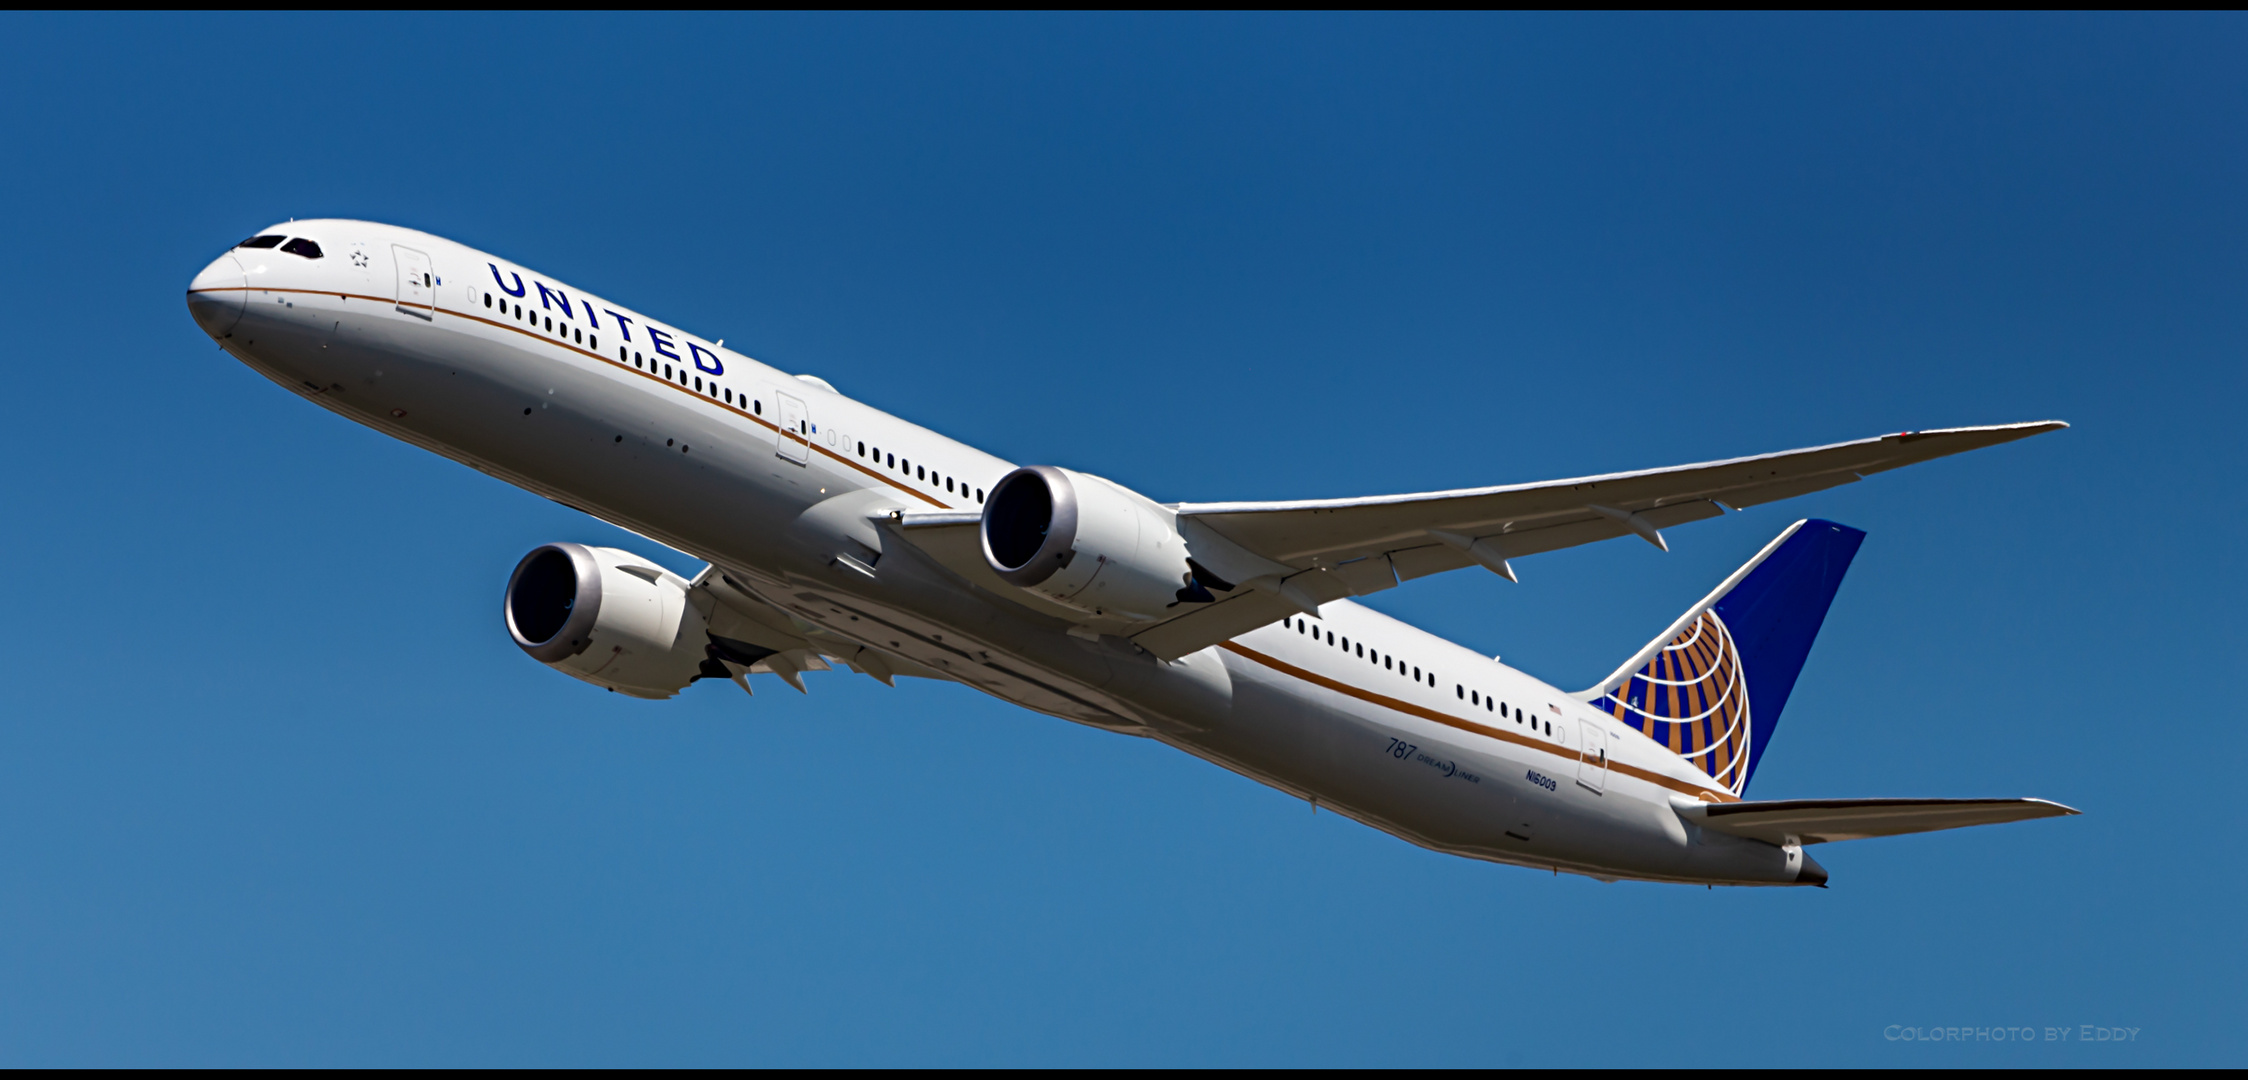 United Airlines, 787 Dream Liner